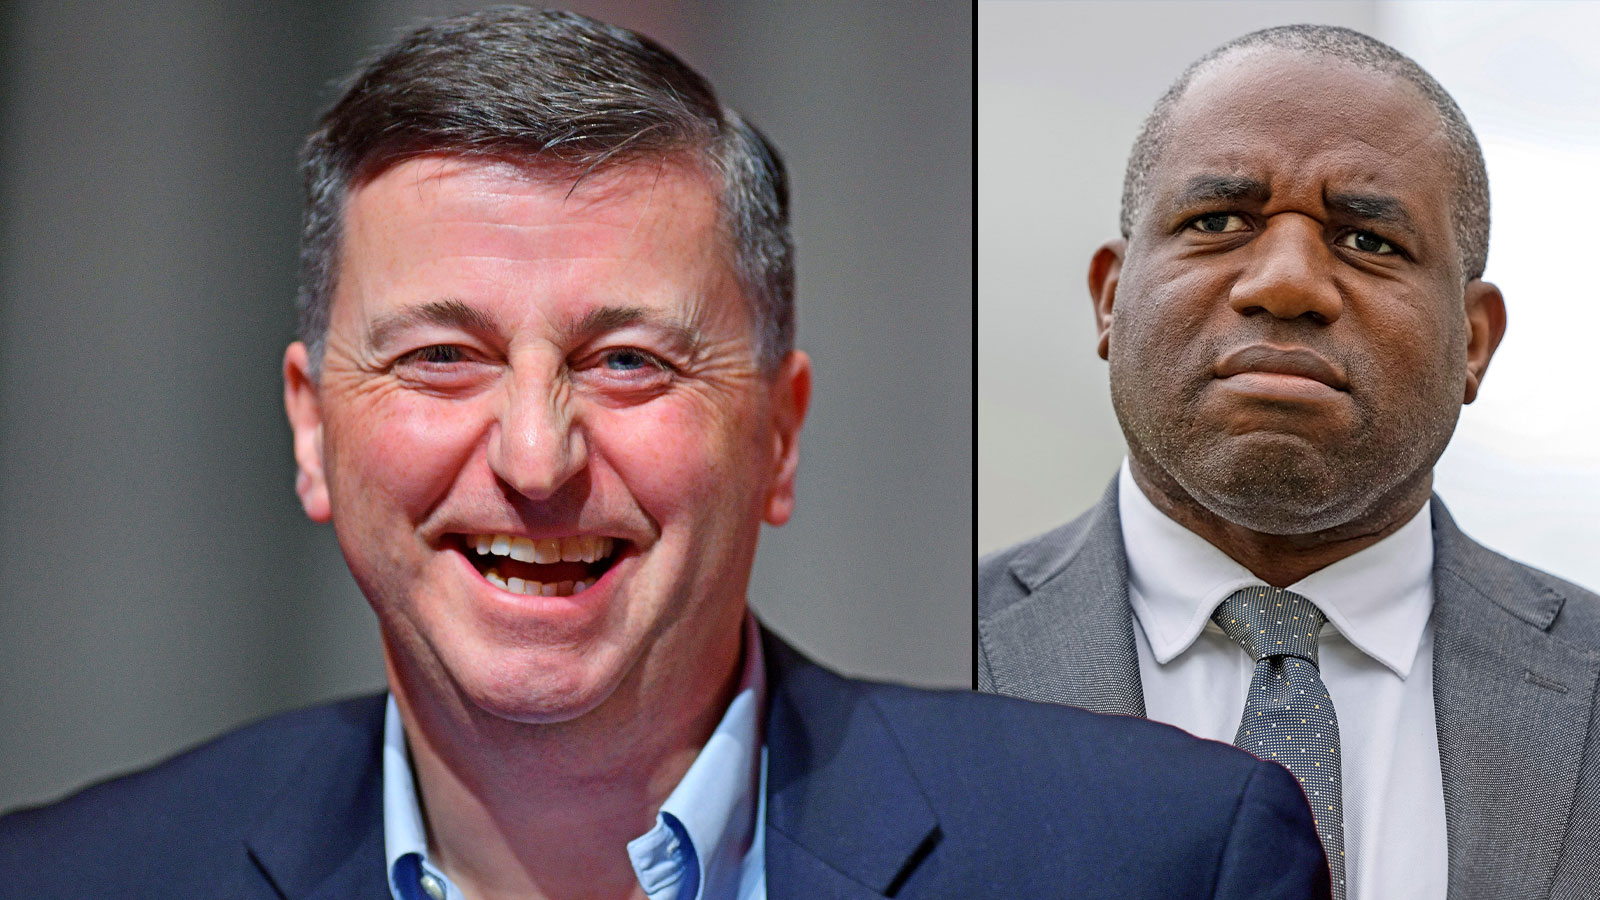 Douglas Alexander is said to be lined up to replace David Lammy — rumour that have irked the shadow foreign secretary